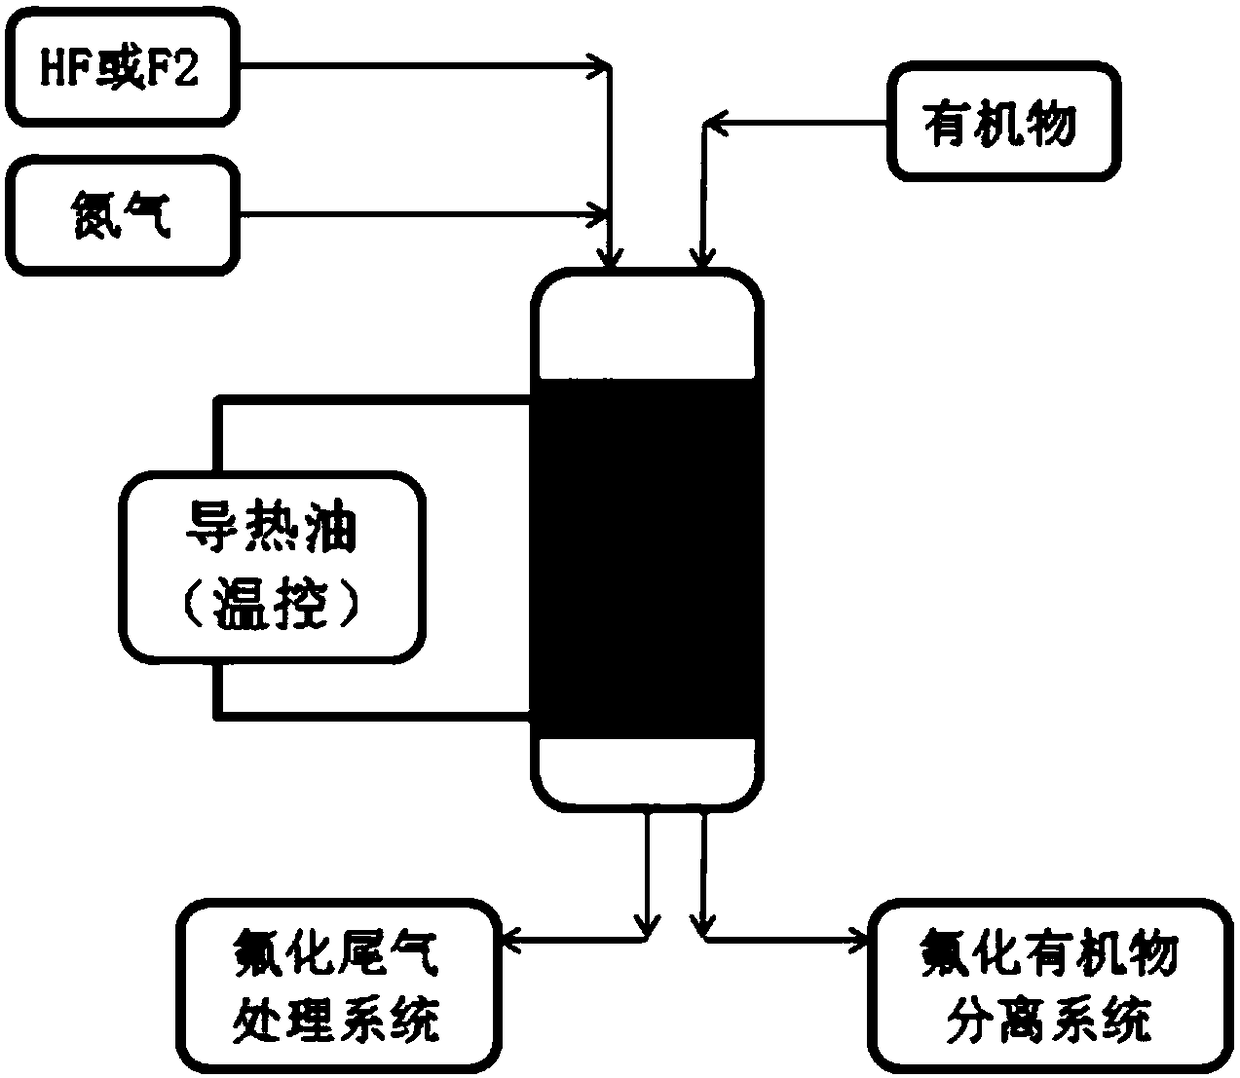 Preparation method of cobaltic fluoride particles